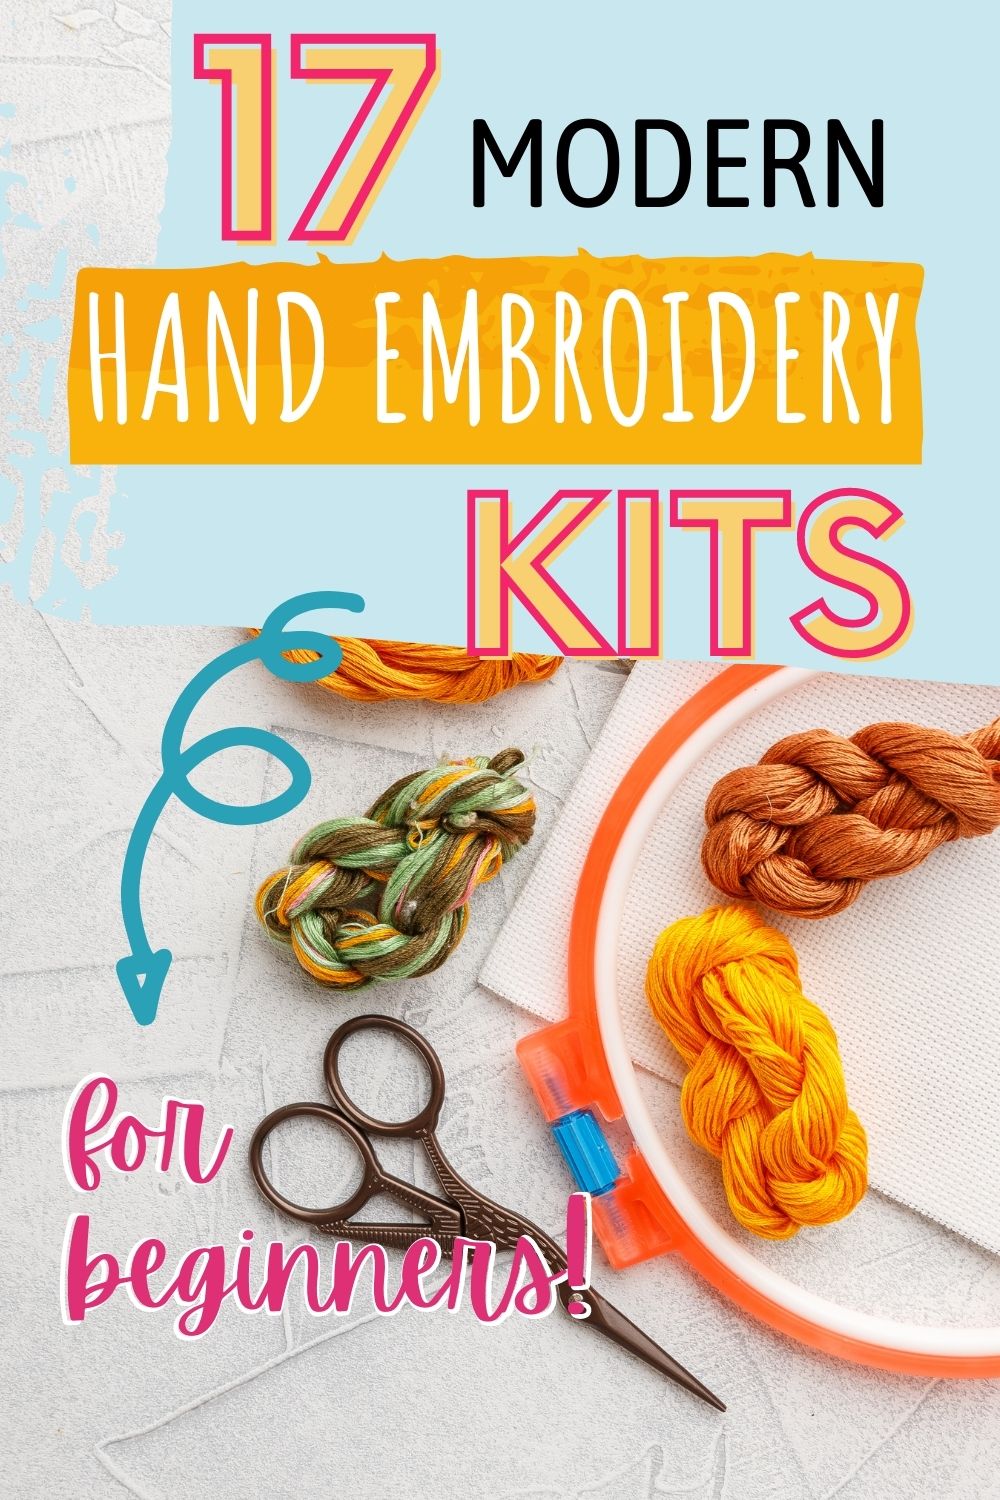 Embroidery Kit Cat Embroidery Kit for Beginner Modern Embroidery